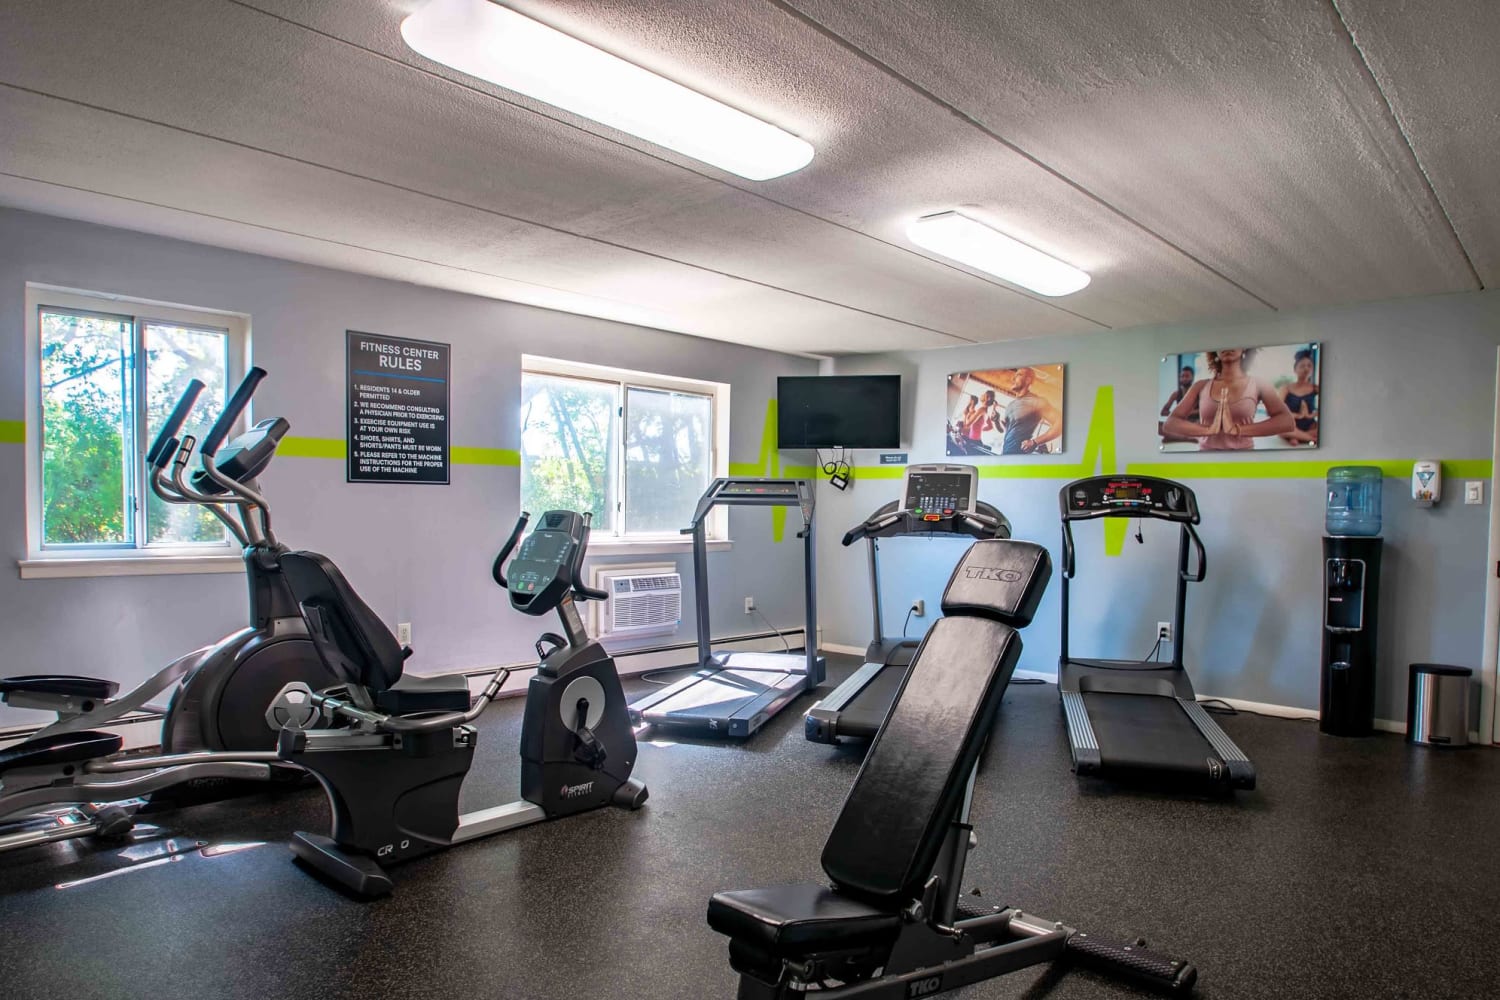 Fitness center with equipment at Camp Hill Plaza Apartment Homes in Camp Hill, Pennsylvania